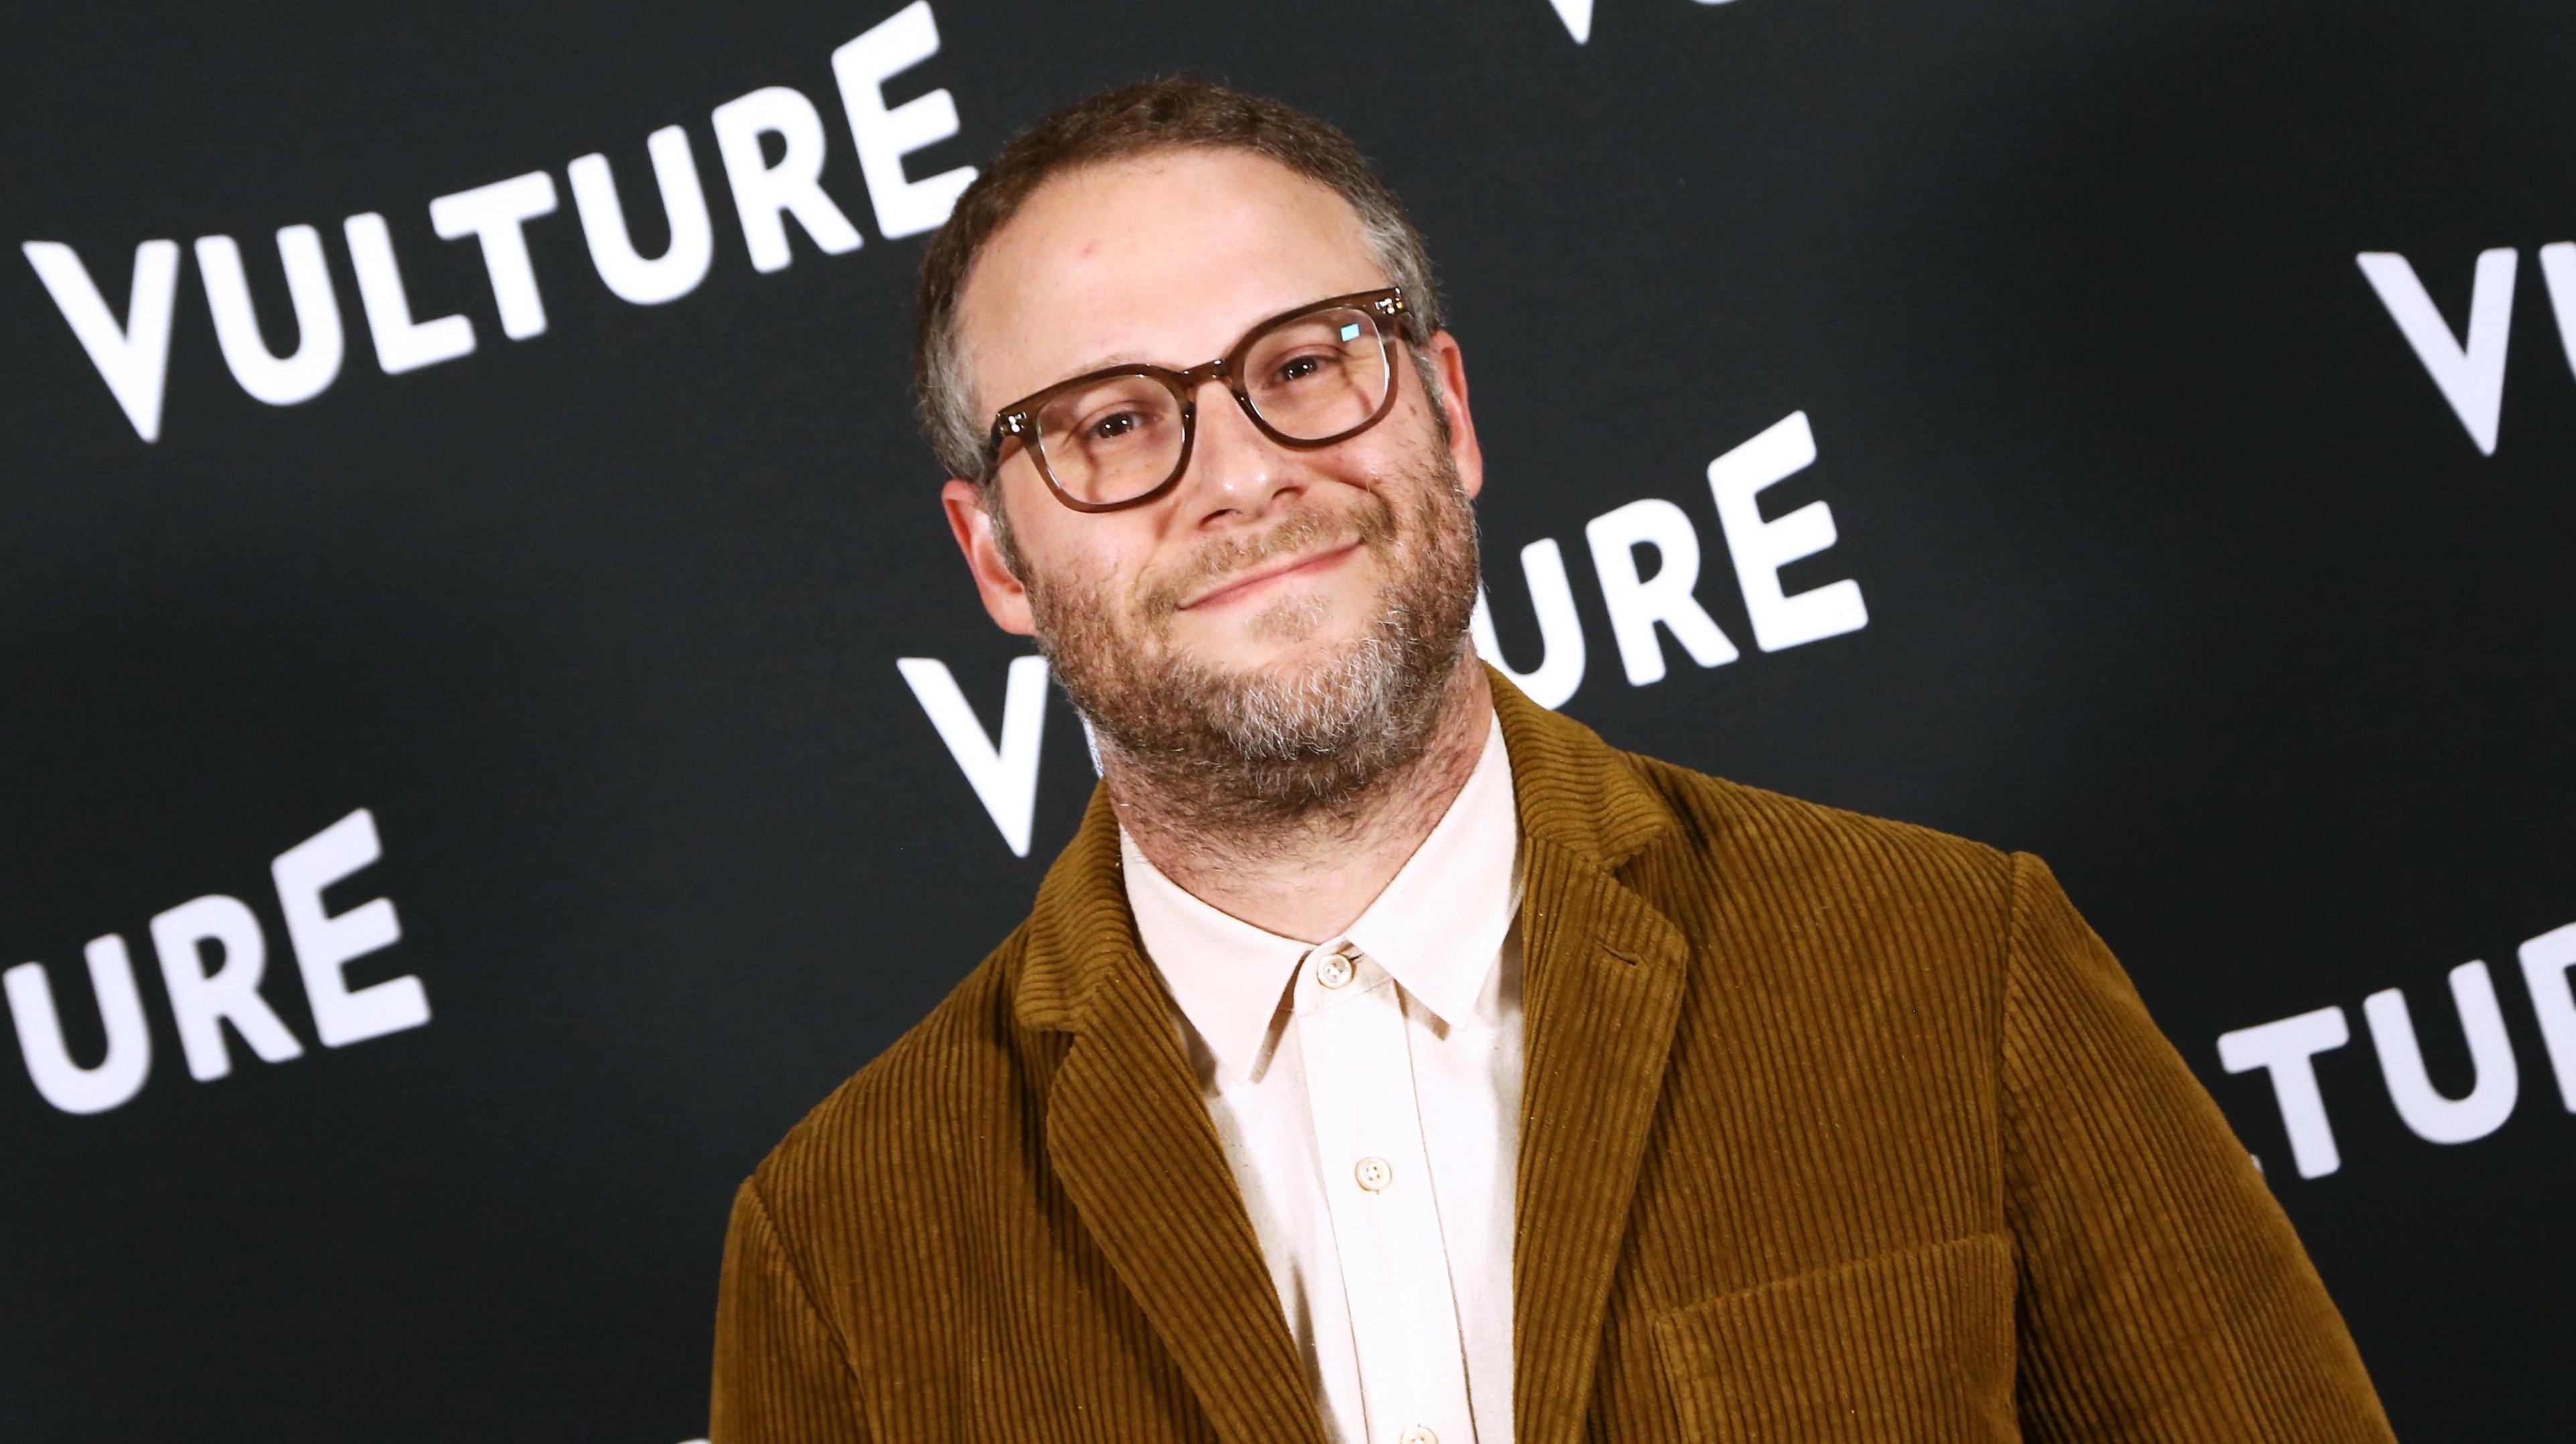 Seth Rogen on the Oscars: “Maybe people just don’t care”